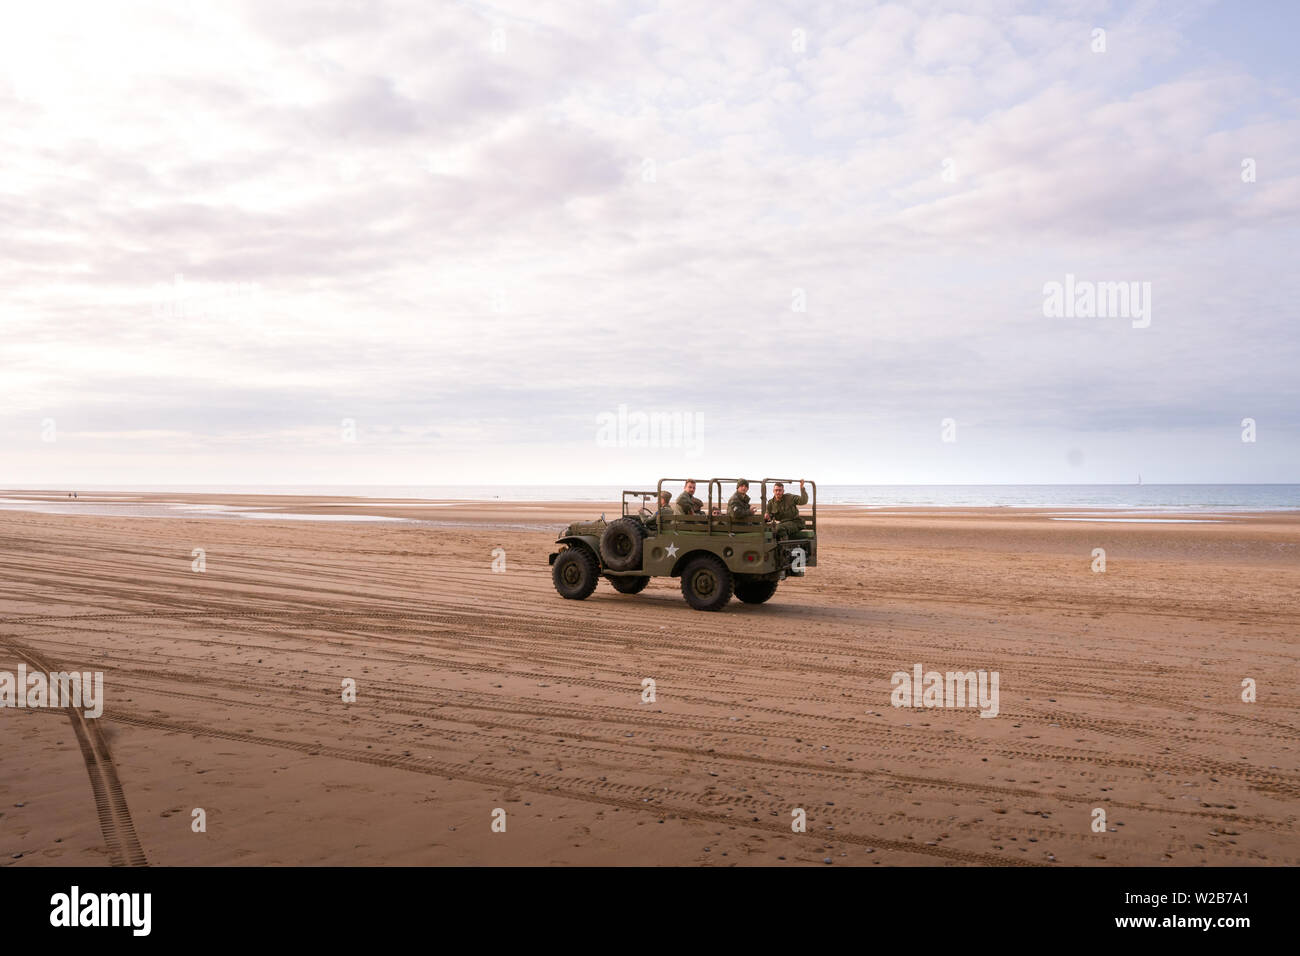 Vintage World War 2 Jeep on a beach in Normandy, driving off-road with people on board dressed in military uniforms Stock Photo